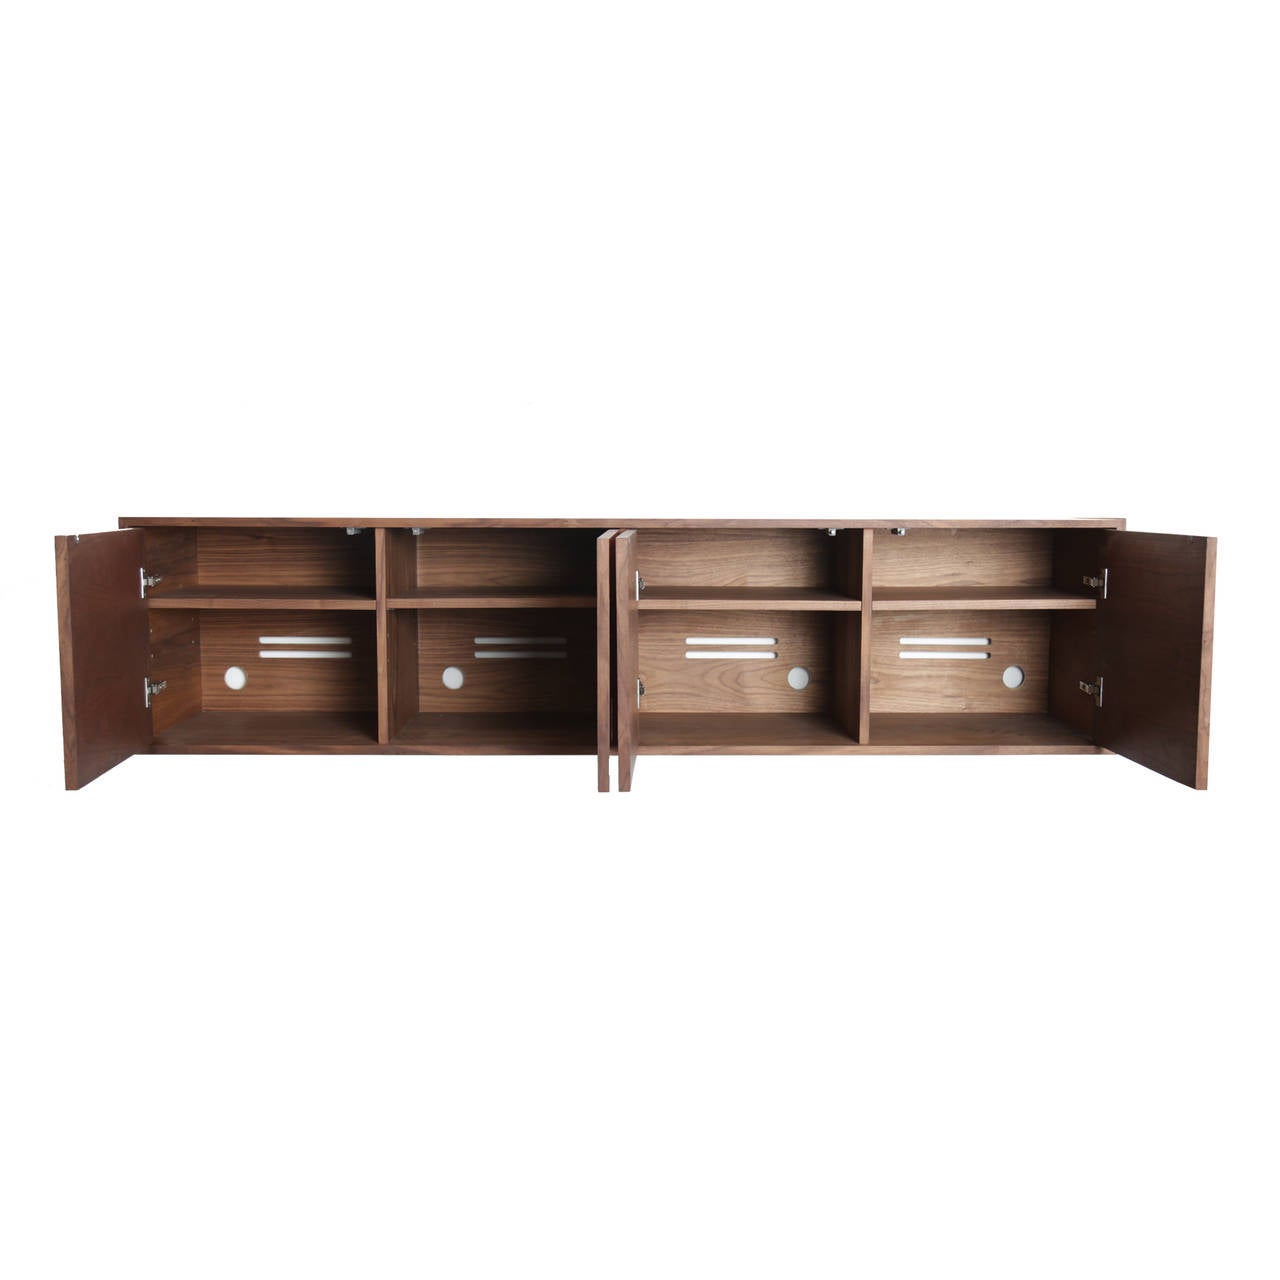 American The Squared Floating Credezna in Walnut with Copper Doors by Thomas Hayes Studio